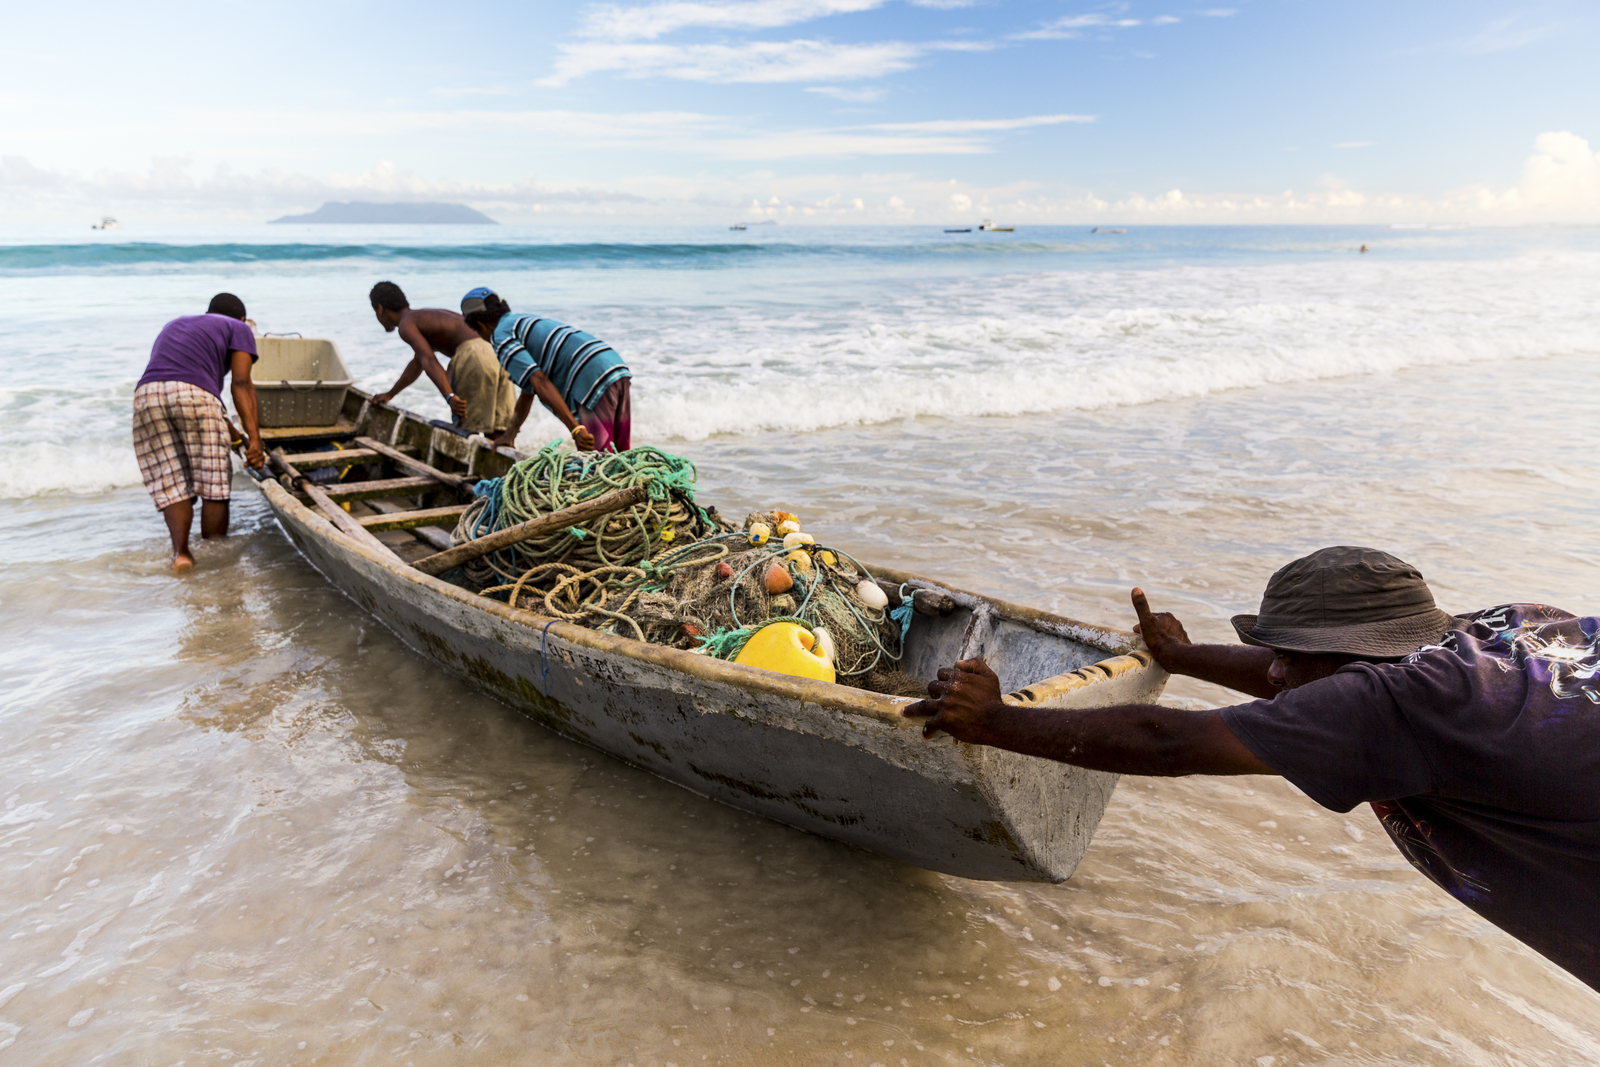 Men pushing a small wooden boat filled with nets.